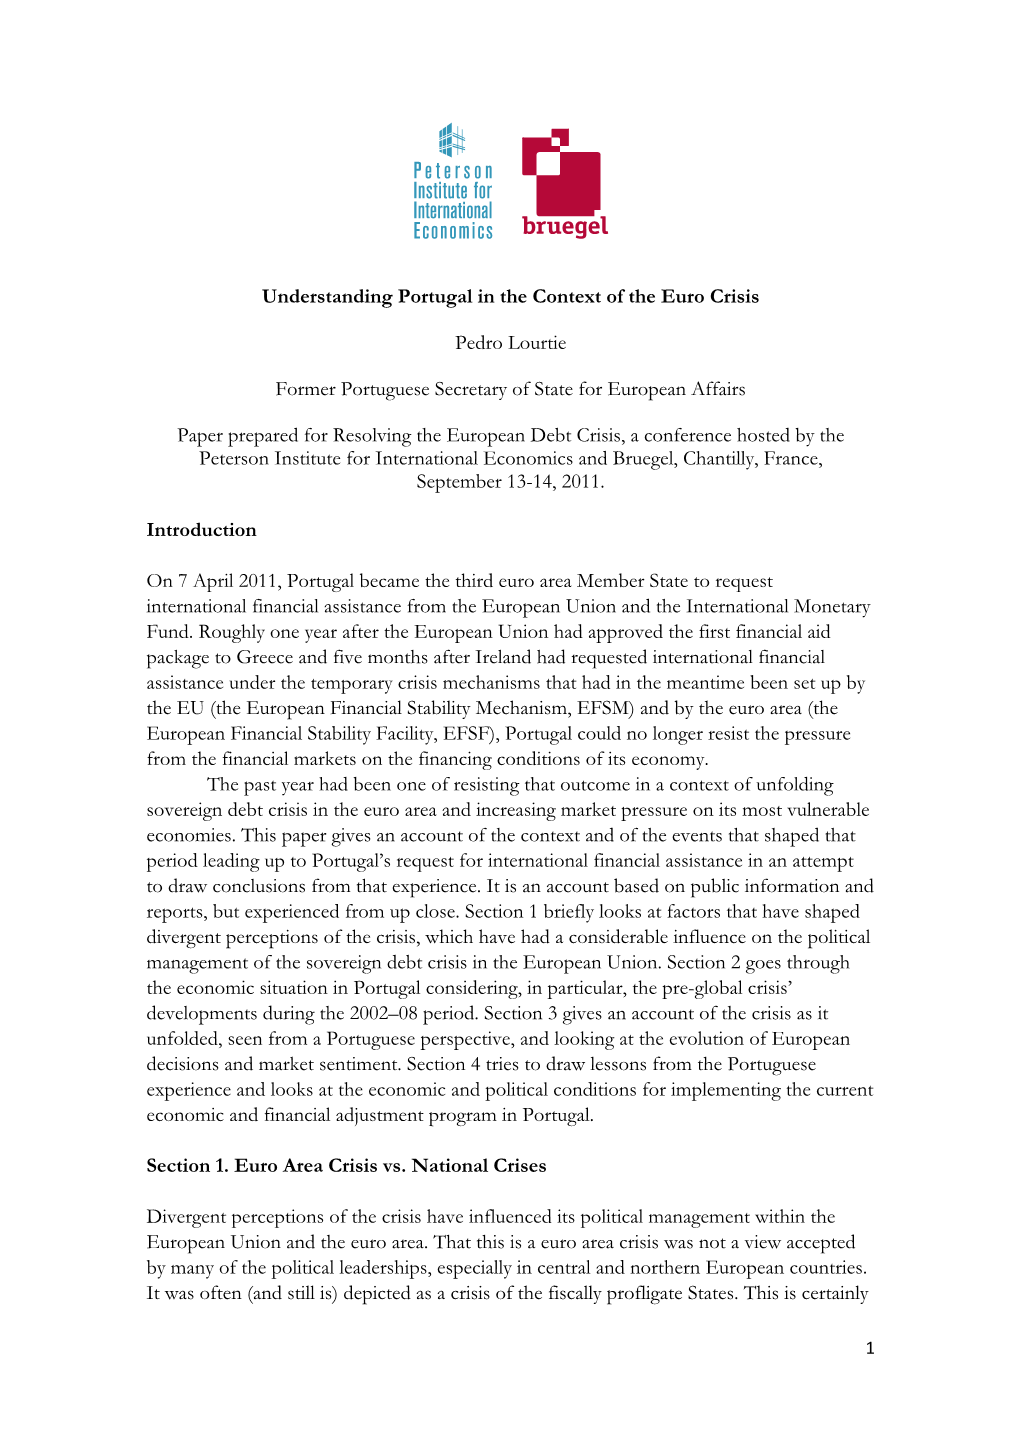 Paper: Understanding Portugal in the Context of the Euro Crisis